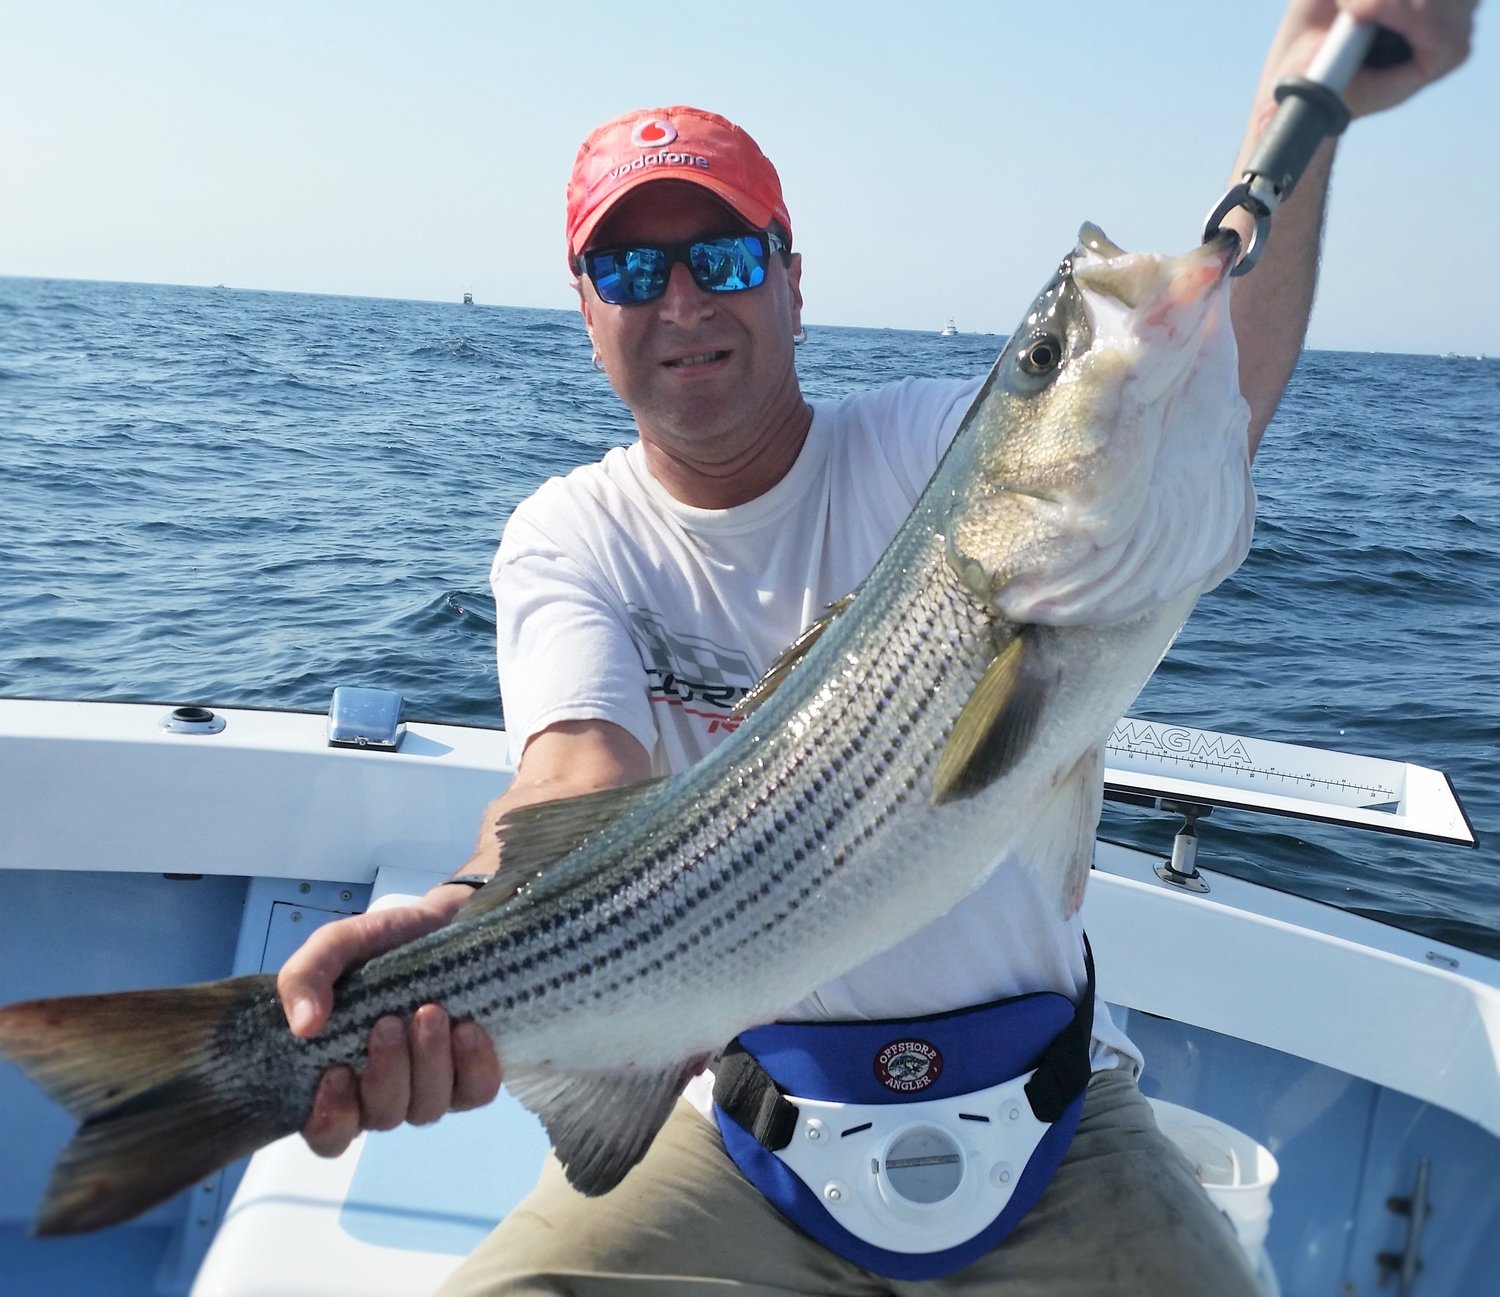 Striped bass Amendment:  Steve Burstein of West Warwick, RI with a Block Island striped bass.  Fish mangers are asking anglers for input on amendments for striped bass and four other species.